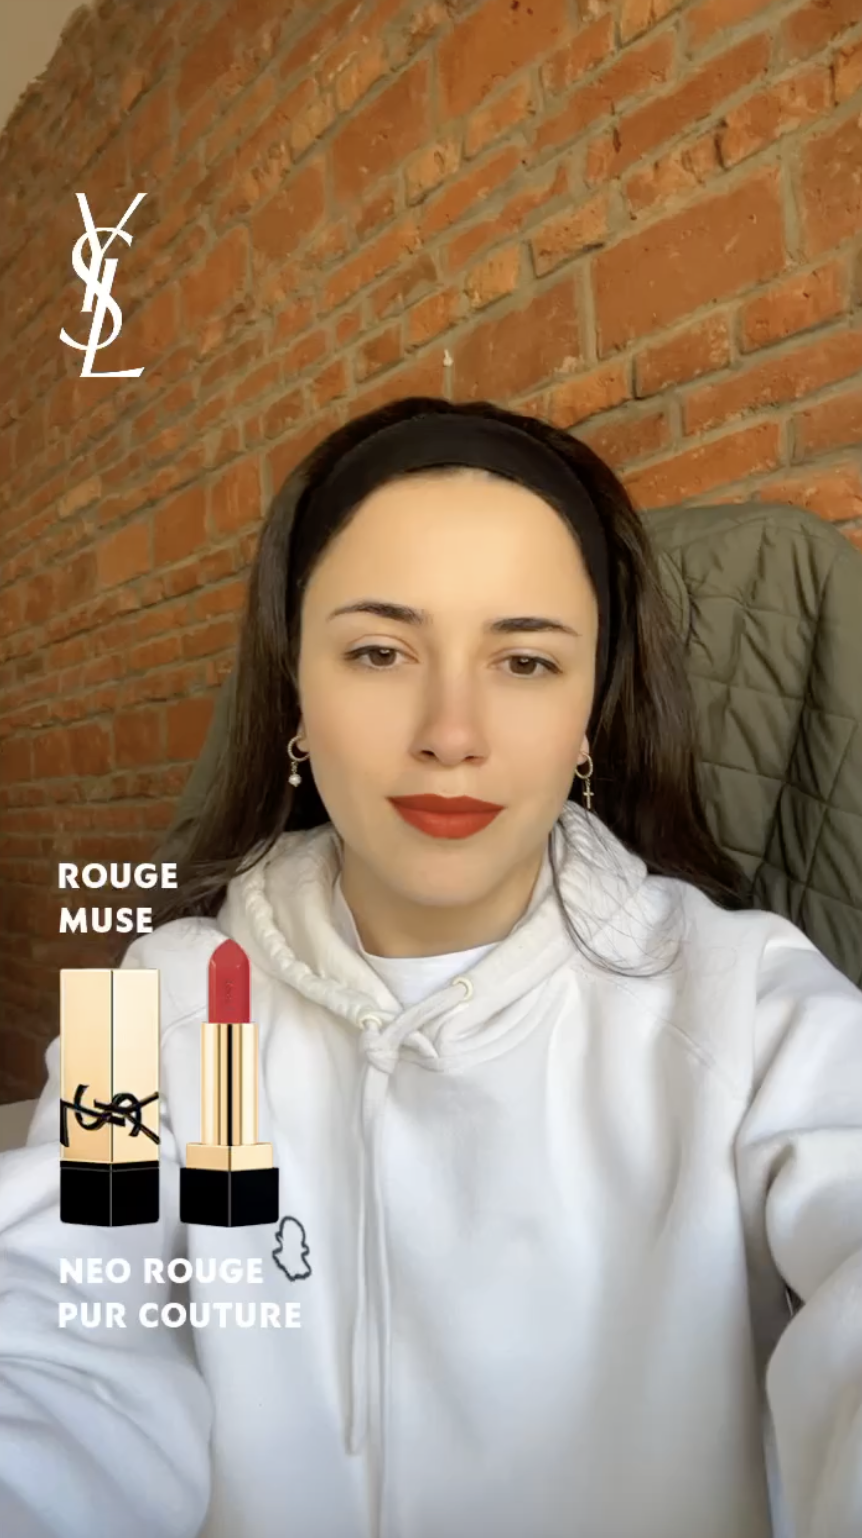 L’Oréal Greece: Raising Awareness For YSL Rouge Pur Couture Through Augmented Reality